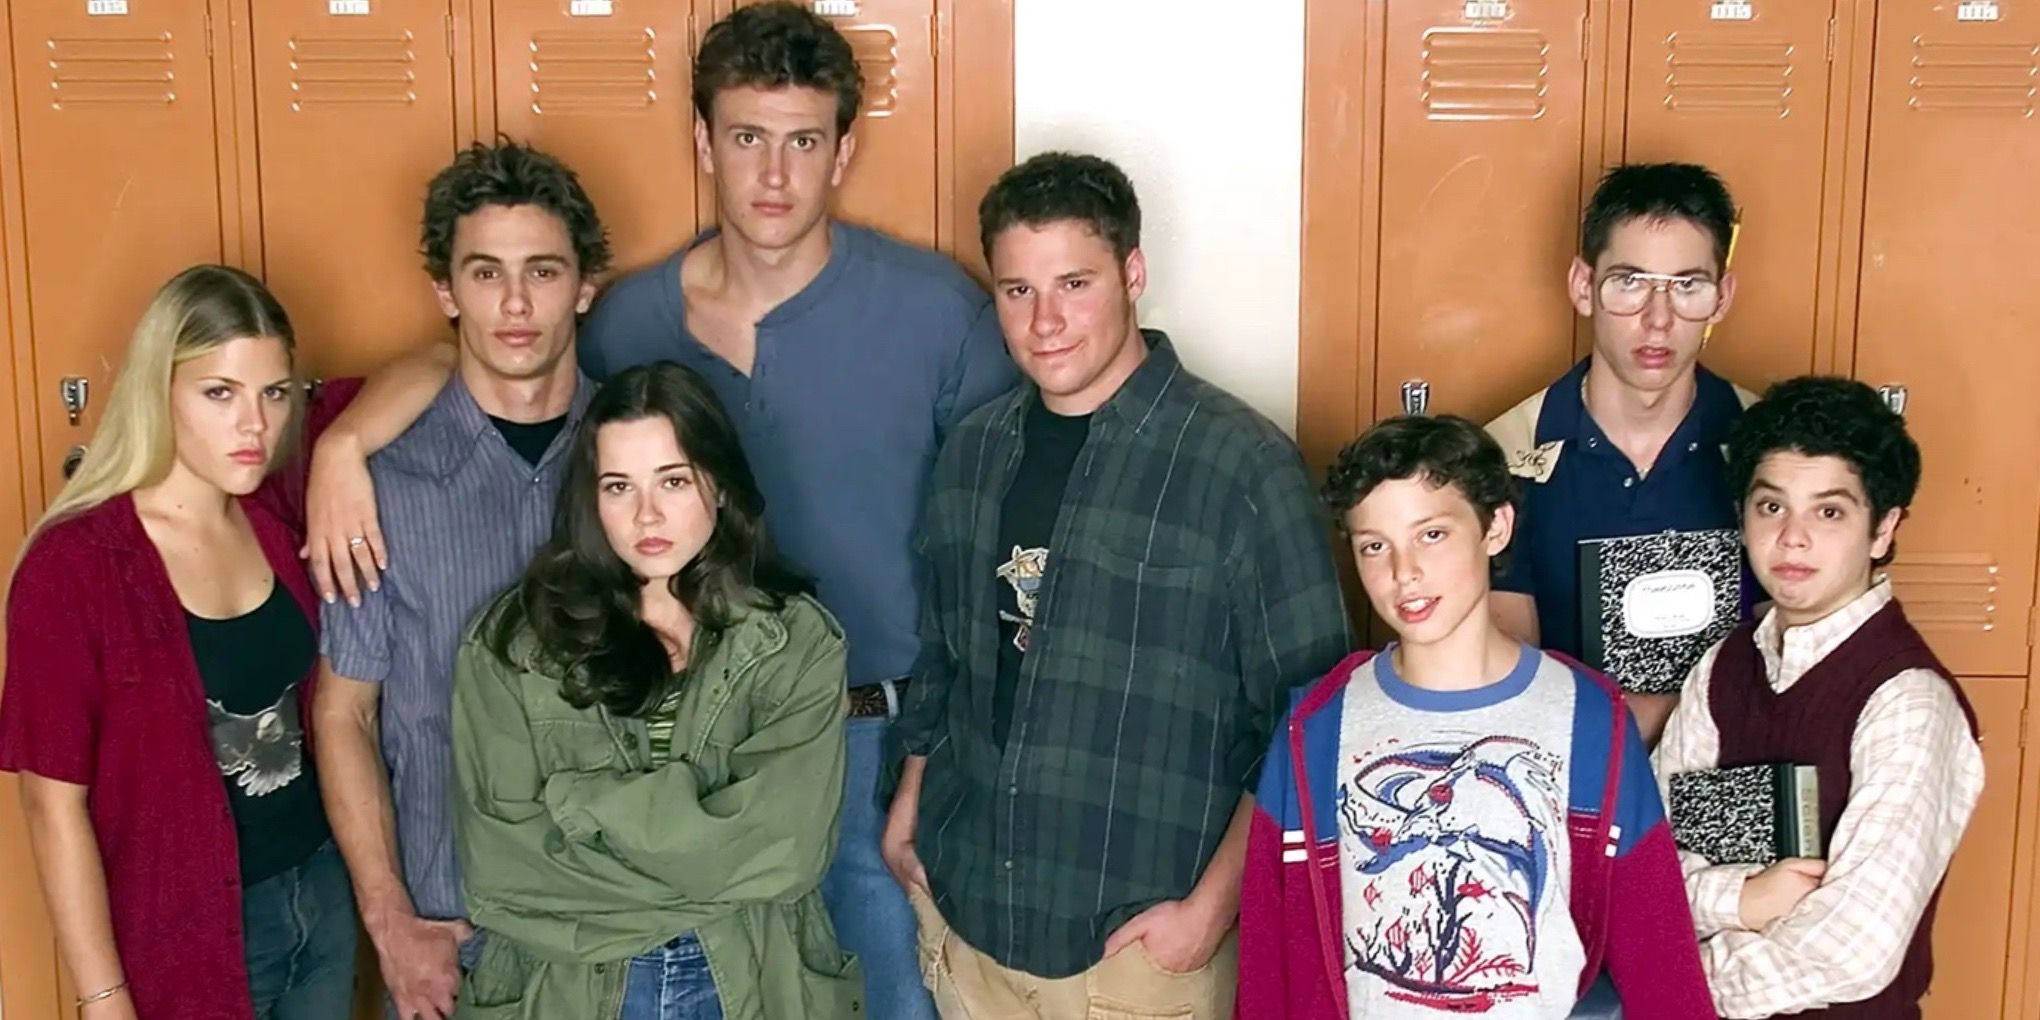 Freaks and Geeks cast standing together